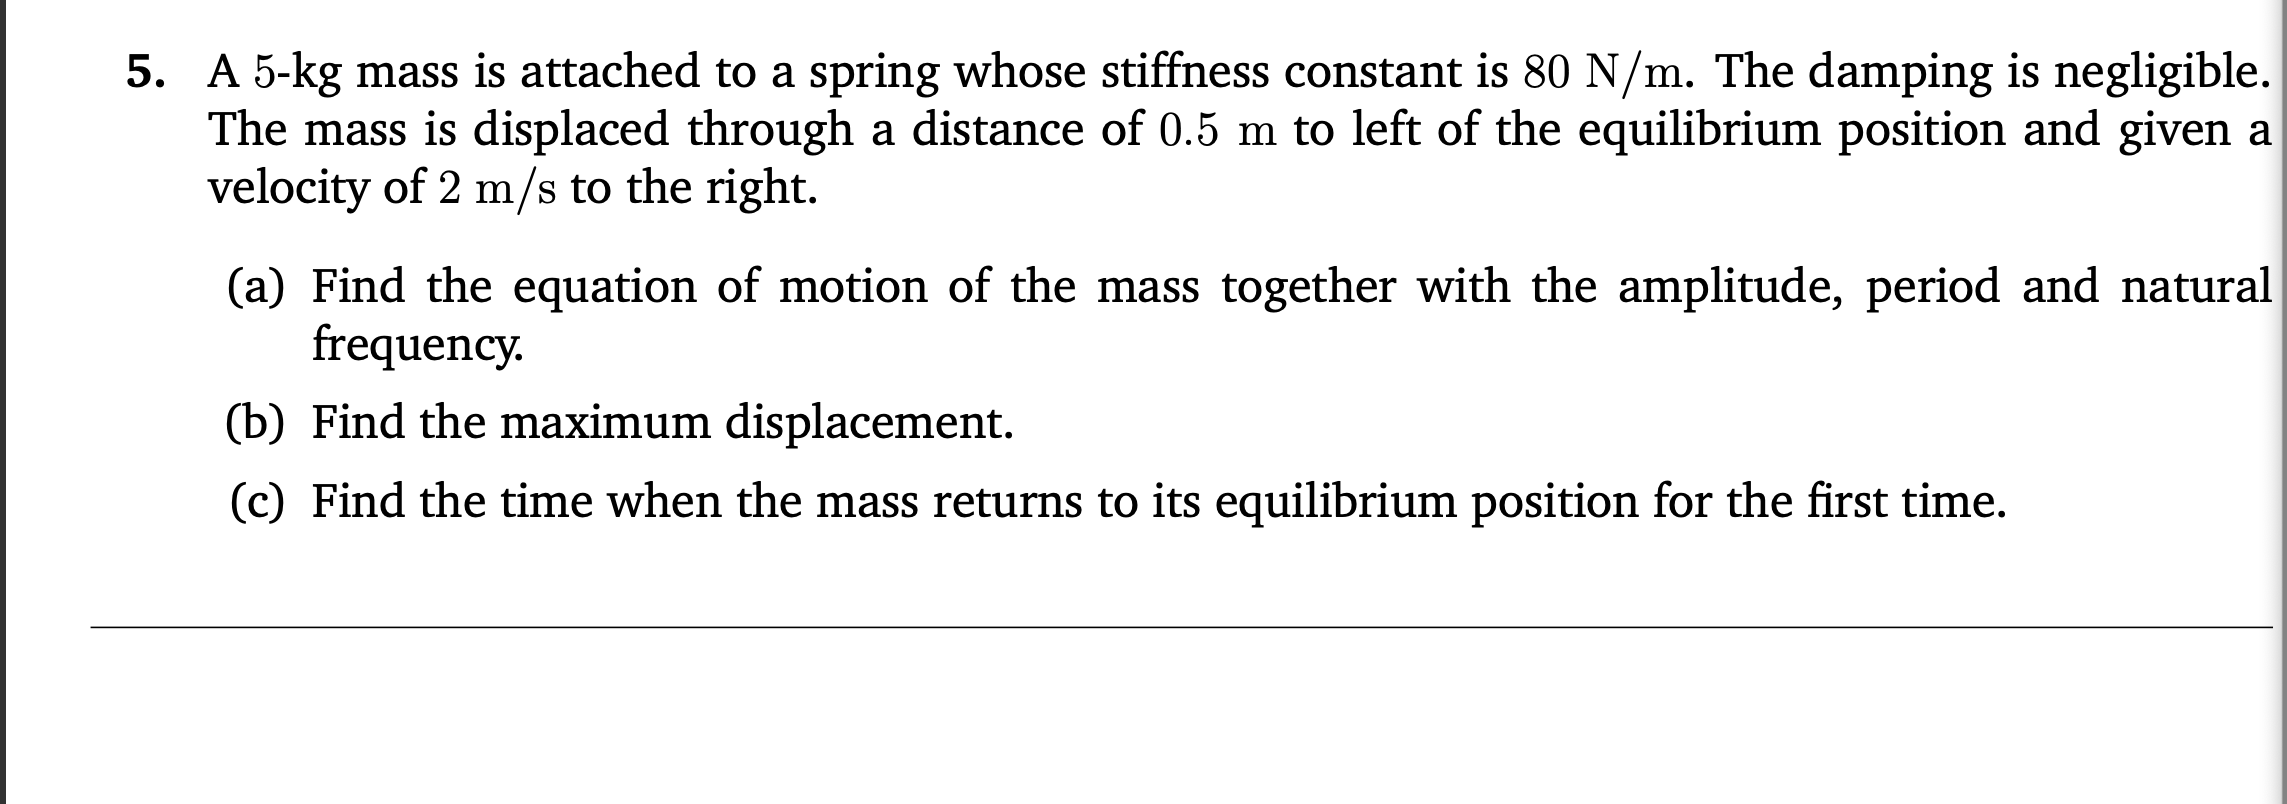 A 5-kg mass is attached to a spring whose stiffness constant is 80 N/m. The damping is negligible.
The mass is displaced through a distance of 0.5 m to left of the equilibrium position and given a
velocity of 2 m/s to the right.
(a) Find the equation of motion of the mass together with the amplitude, period and natural
frequency.
(b) Find the maximum displacement.
(c) Find the time when the mass returns to its equilibrium position for the first time.
